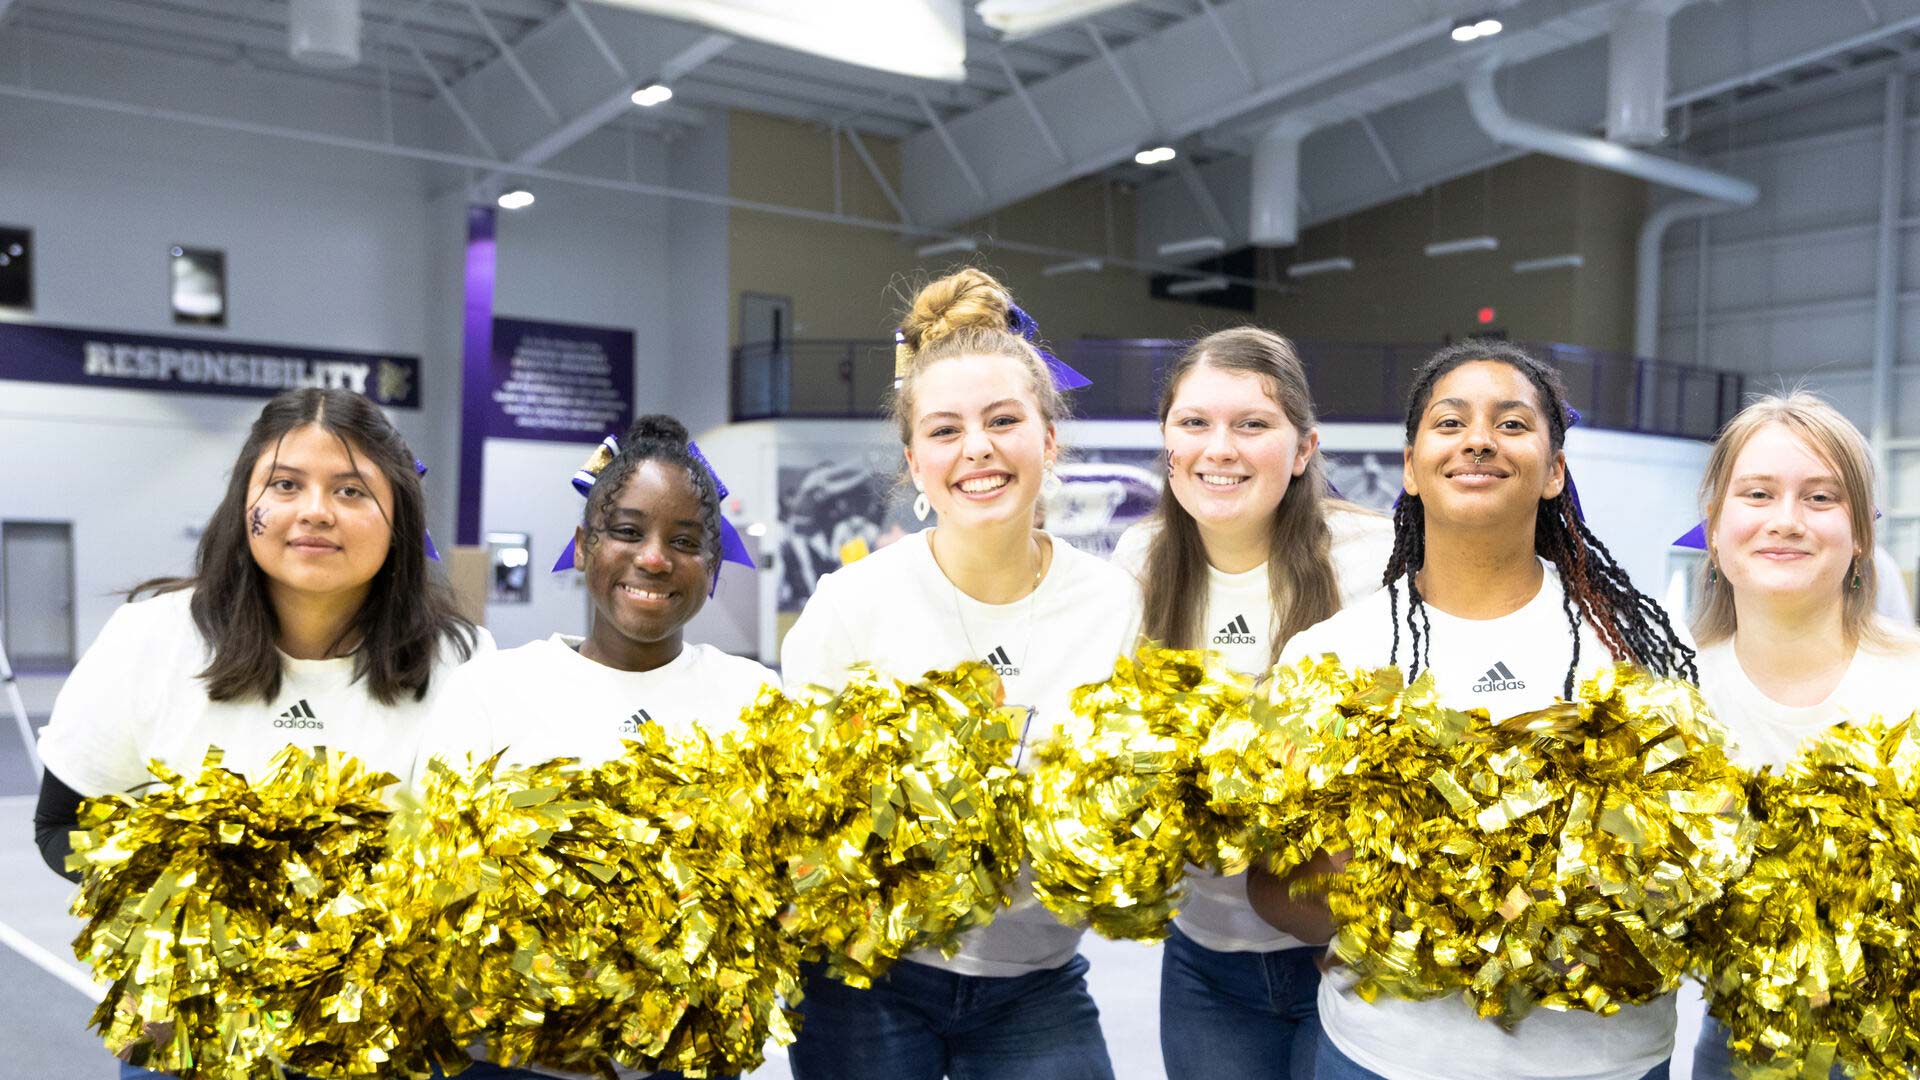 Six Houghton students standing with shimmery gold pom poms during Homecoming weekend.